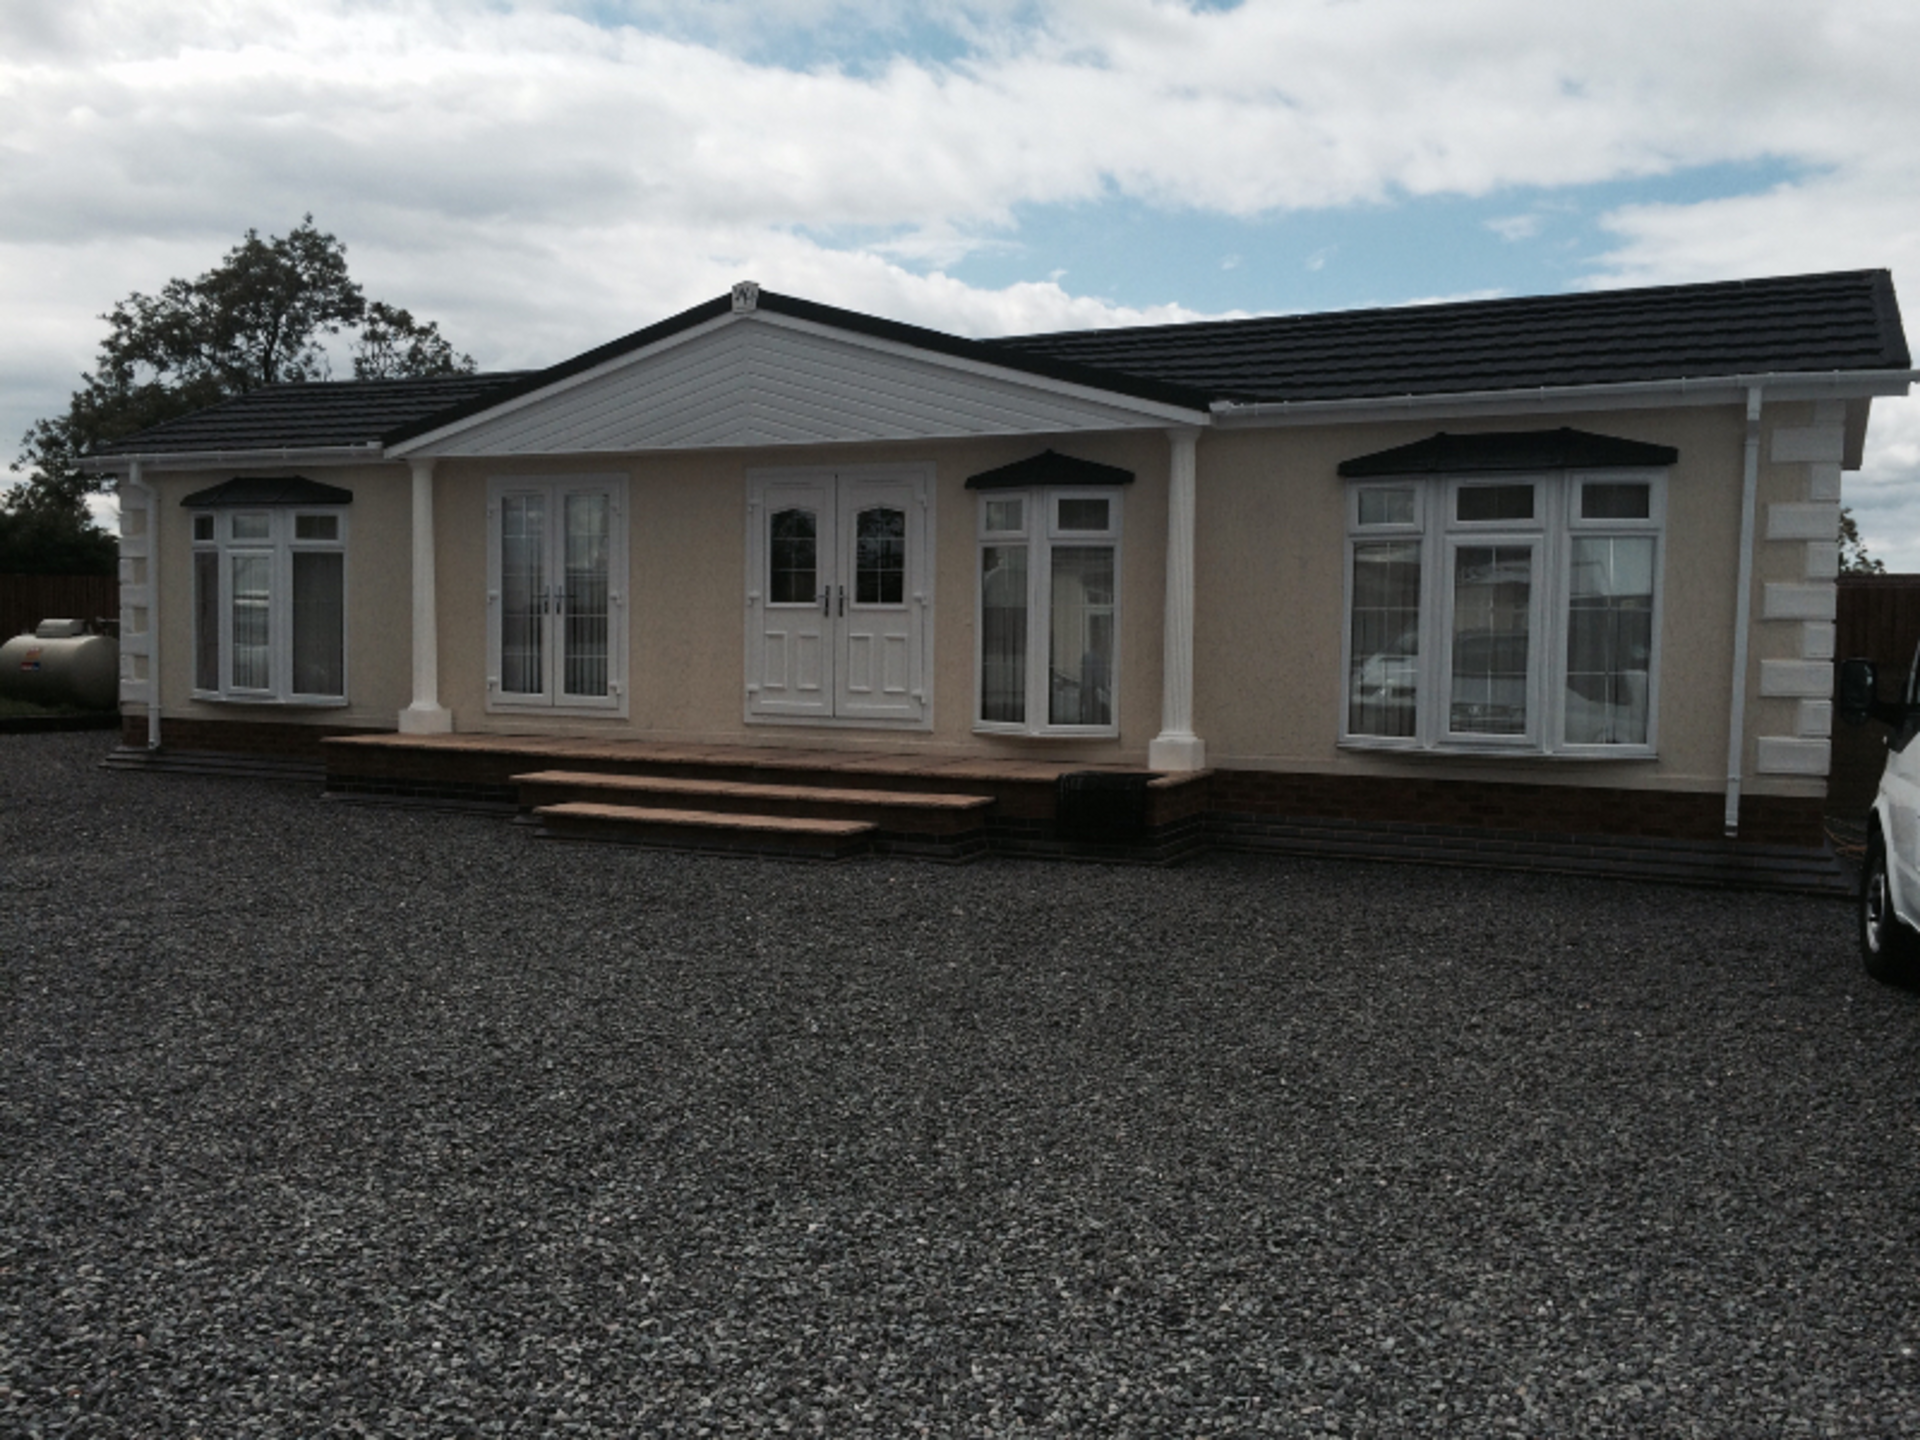 WILTSHIRE MOBILE PARK HOME 48FT X 14FT - 3 BEDROOM LUXURY CHALET - MASSIVE SPEC - 1 OWNER FROM NEW!!